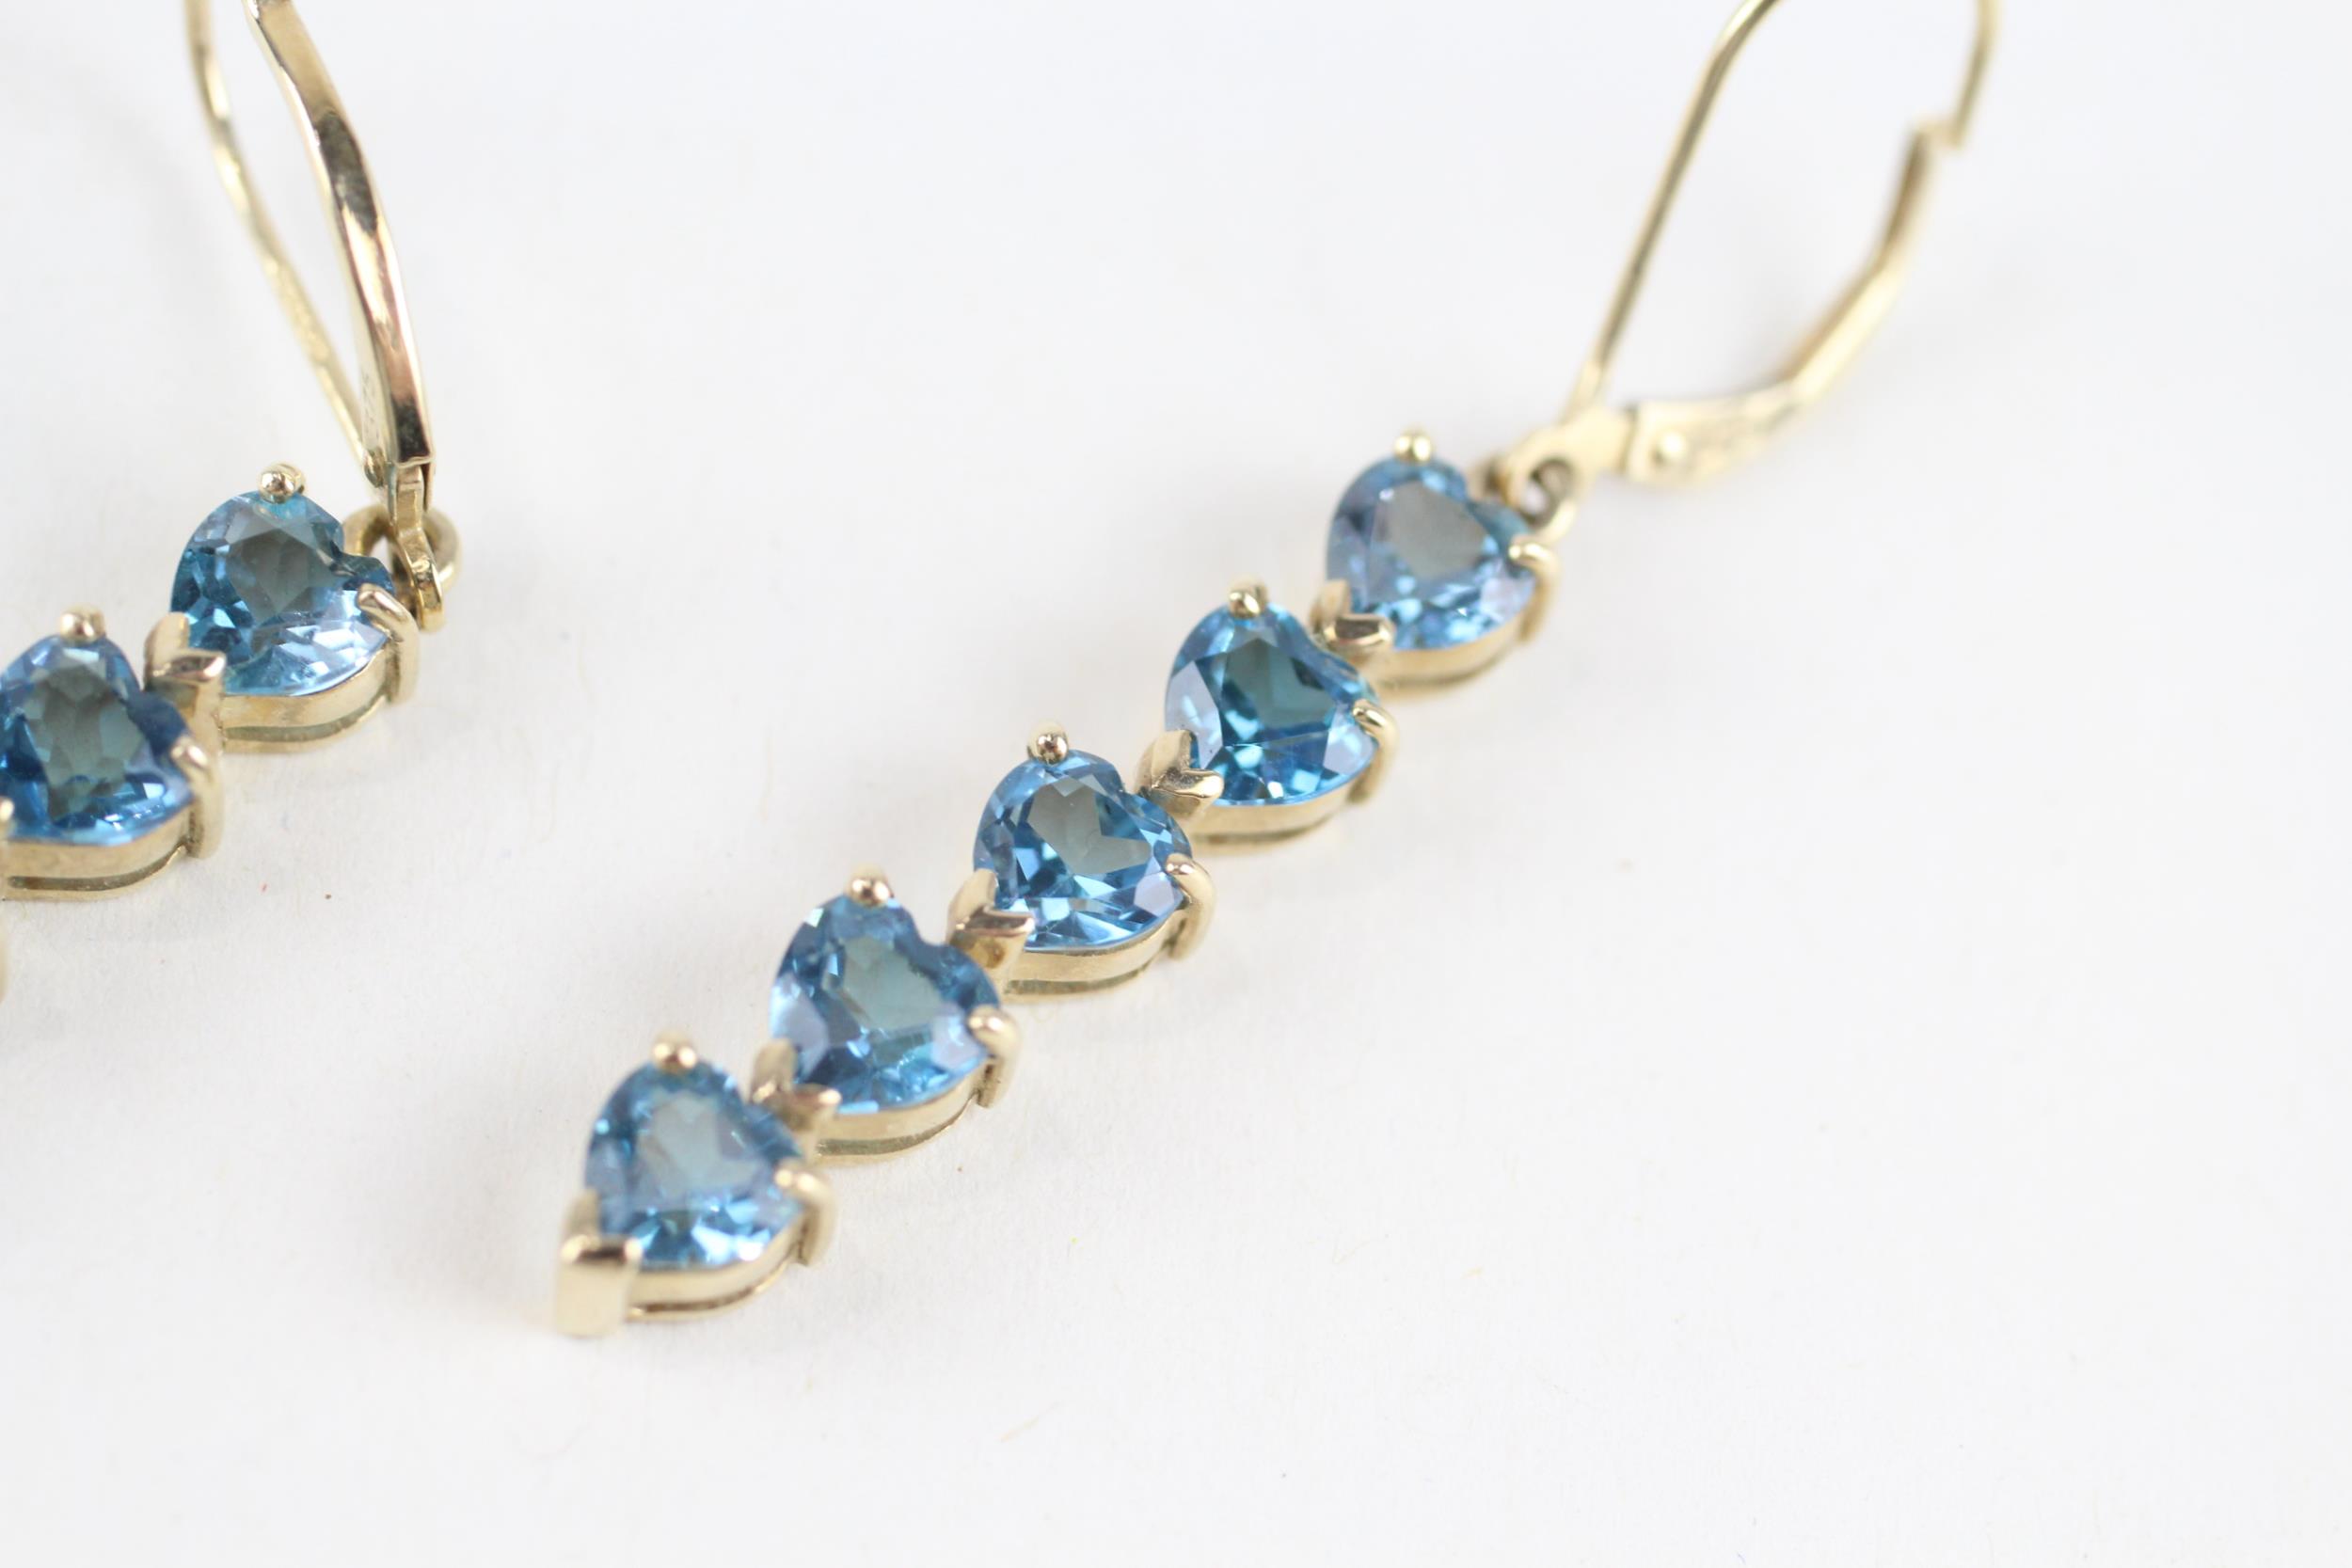 9ct gold heart shaped cut blue topaz drop earrings with lever backs - 5.1 g - Image 3 of 4